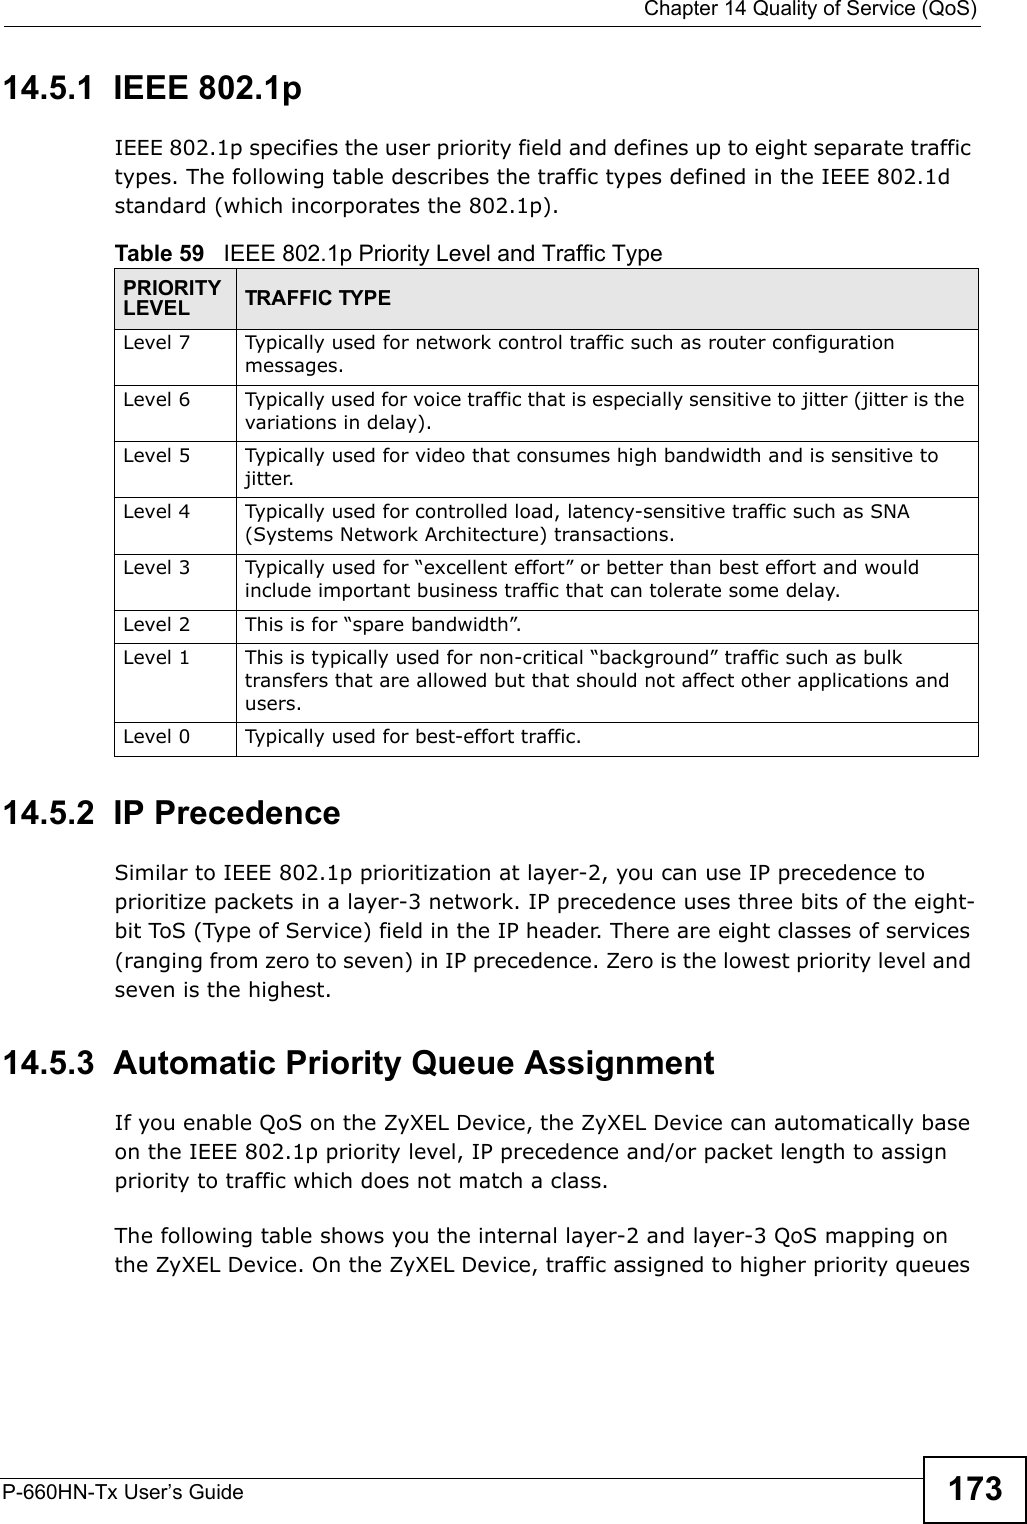  Chapter 14 Quality of Service (QoS)P-660HN-Tx User’s Guide 17314.5.1  IEEE 802.1pIEEE 802.1p specifies the user priority field and defines up to eight separate traffic types. The following table describes the traffic types defined in the IEEE 802.1d standard (which incorporates the 802.1p). 14.5.2  IP PrecedenceSimilar to IEEE 802.1p prioritization at layer-2, you can use IP precedence to prioritize packets in a layer-3 network. IP precedence uses three bits of the eight-bit ToS (Type of Service) field in the IP header. There are eight classes of services (ranging from zero to seven) in IP precedence. Zero is the lowest priority level and seven is the highest.14.5.3  Automatic Priority Queue AssignmentIf you enable QoS on the ZyXEL Device, the ZyXEL Device can automatically base on the IEEE 802.1p priority level, IP precedence and/or packet length to assign priority to traffic which does not match a class.The following table shows you the internal layer-2 and layer-3 QoS mapping on the ZyXEL Device. On the ZyXEL Device, traffic assigned to higher priority queues Table 59   IEEE 802.1p Priority Level and Traffic TypePRIORITY LEVEL TRAFFIC TYPELevel 7 Typically used for network control traffic such as router configuration messages.Level 6 Typically used for voice traffic that is especially sensitive to jitter (jitter is the variations in delay).Level 5 Typically used for video that consumes high bandwidth and is sensitive to jitter.Level 4 Typically used for controlled load, latency-sensitive traffic such as SNA (Systems Network Architecture) transactions.Level 3 Typically used for “excellent effort” or better than best effort and would include important business traffic that can tolerate some delay.Level 2 This is for “spare bandwidth”. Level 1 This is typically used for non-critical “background” traffic such as bulk transfers that are allowed but that should not affect other applications and users. Level 0 Typically used for best-effort traffic.